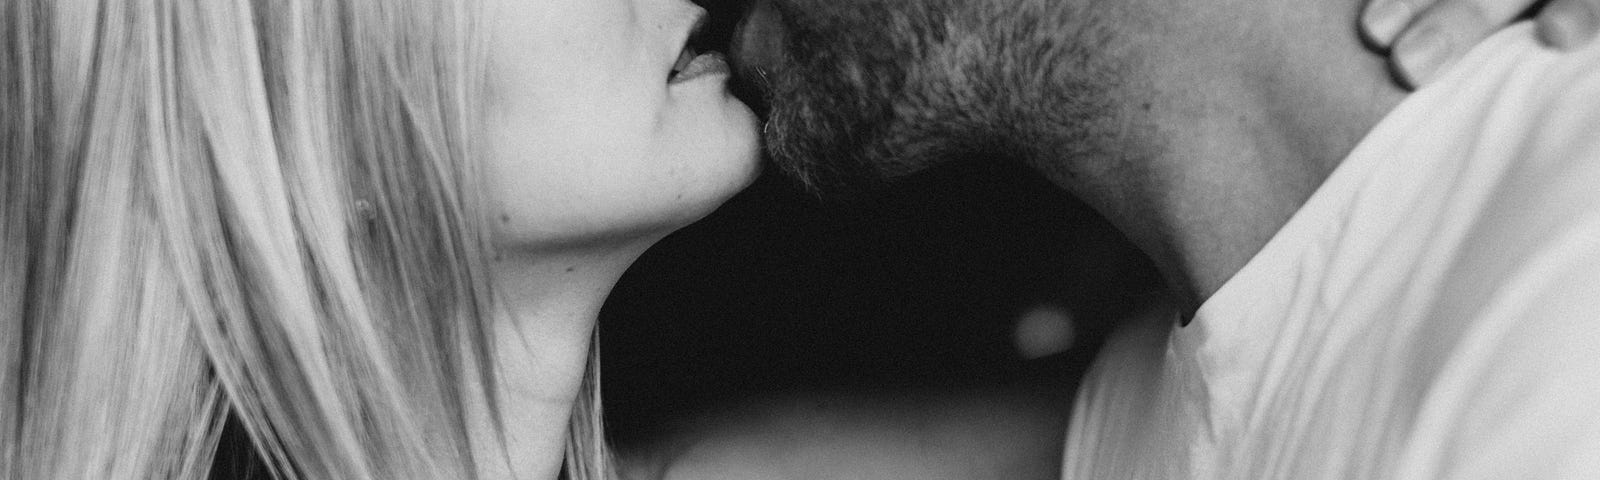 Woman and man kiss, photo taken in black and white